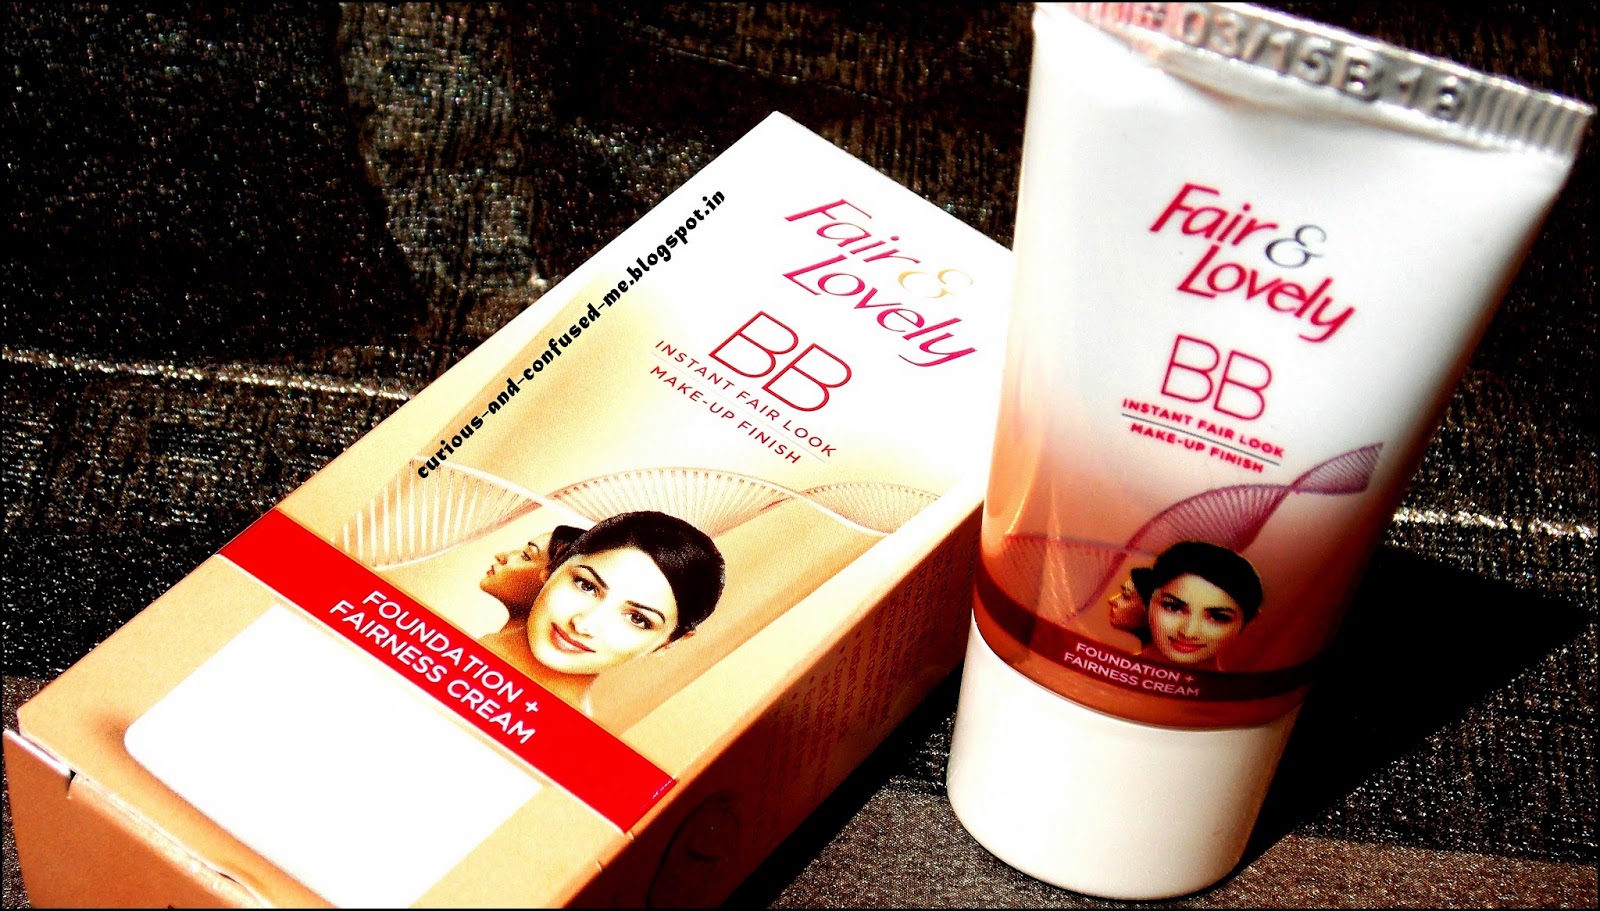 Fair and Lovely BB cream review, Fair and Lovely BB cream swatch, Fair and Lovely BB cream good or bad, BB cream in India, Dusky beauty blogger.